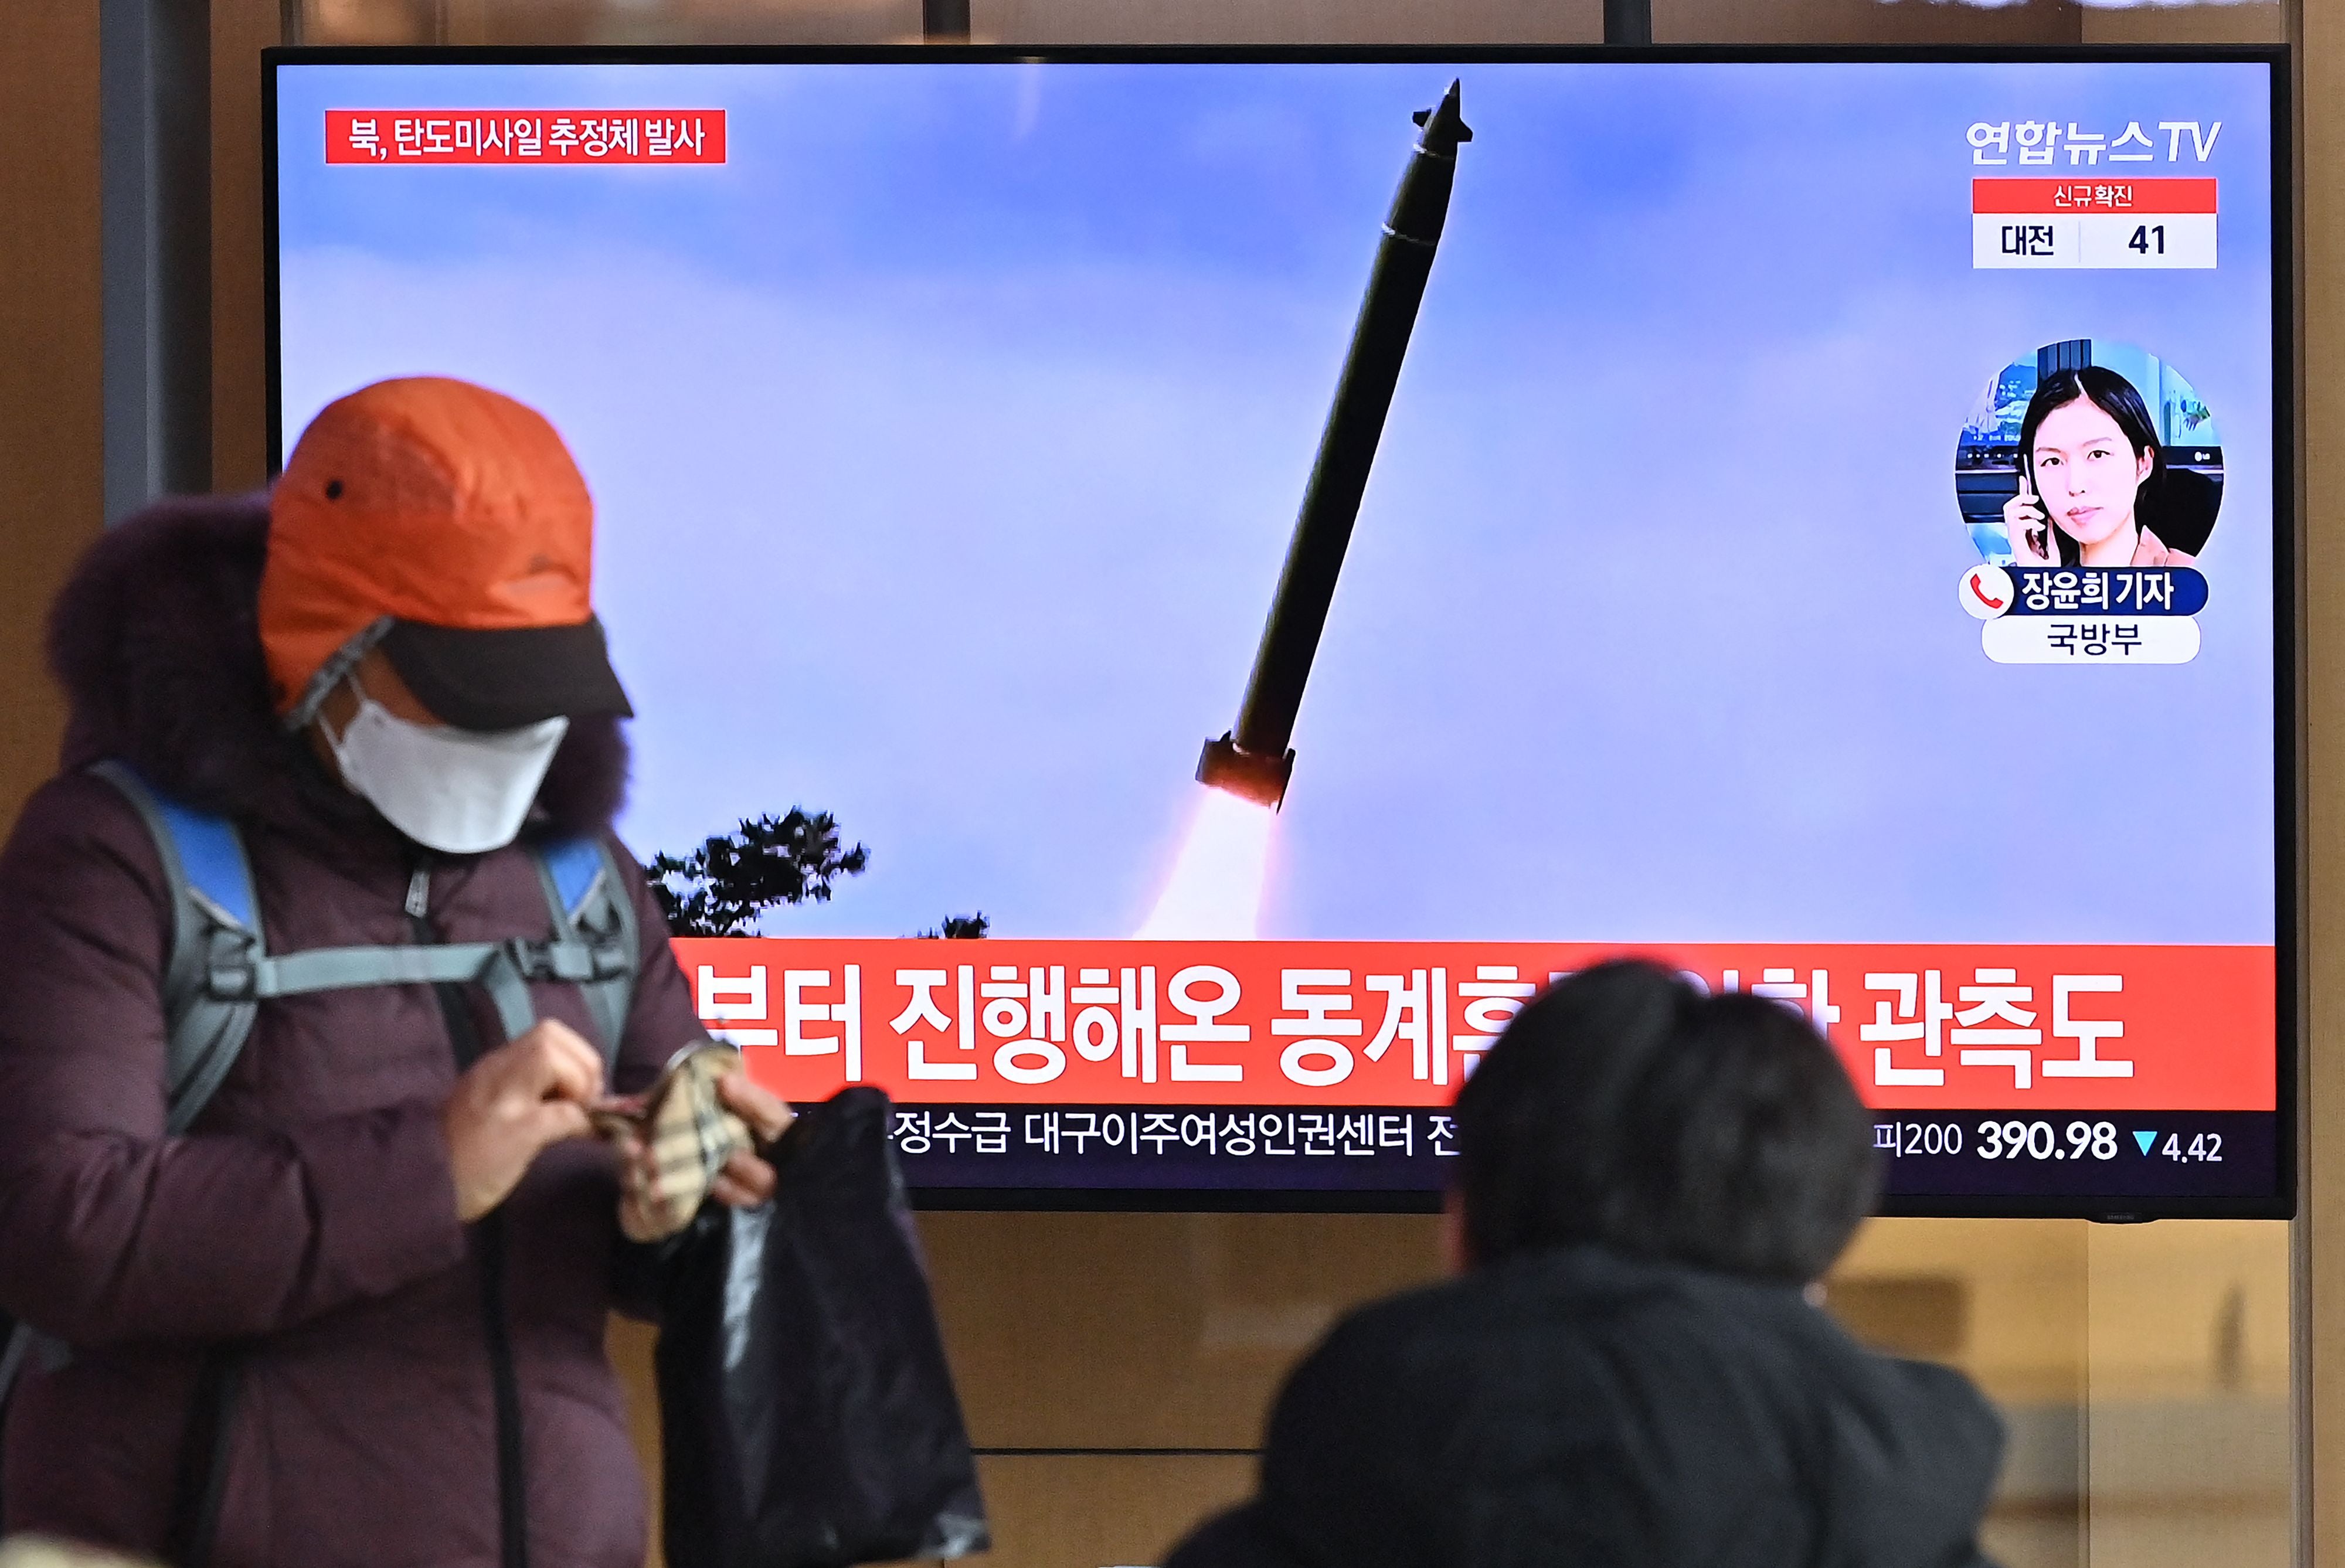 People watch a television news broadcast showing file footage of a North Korean missile test, at a railway station in Seoul